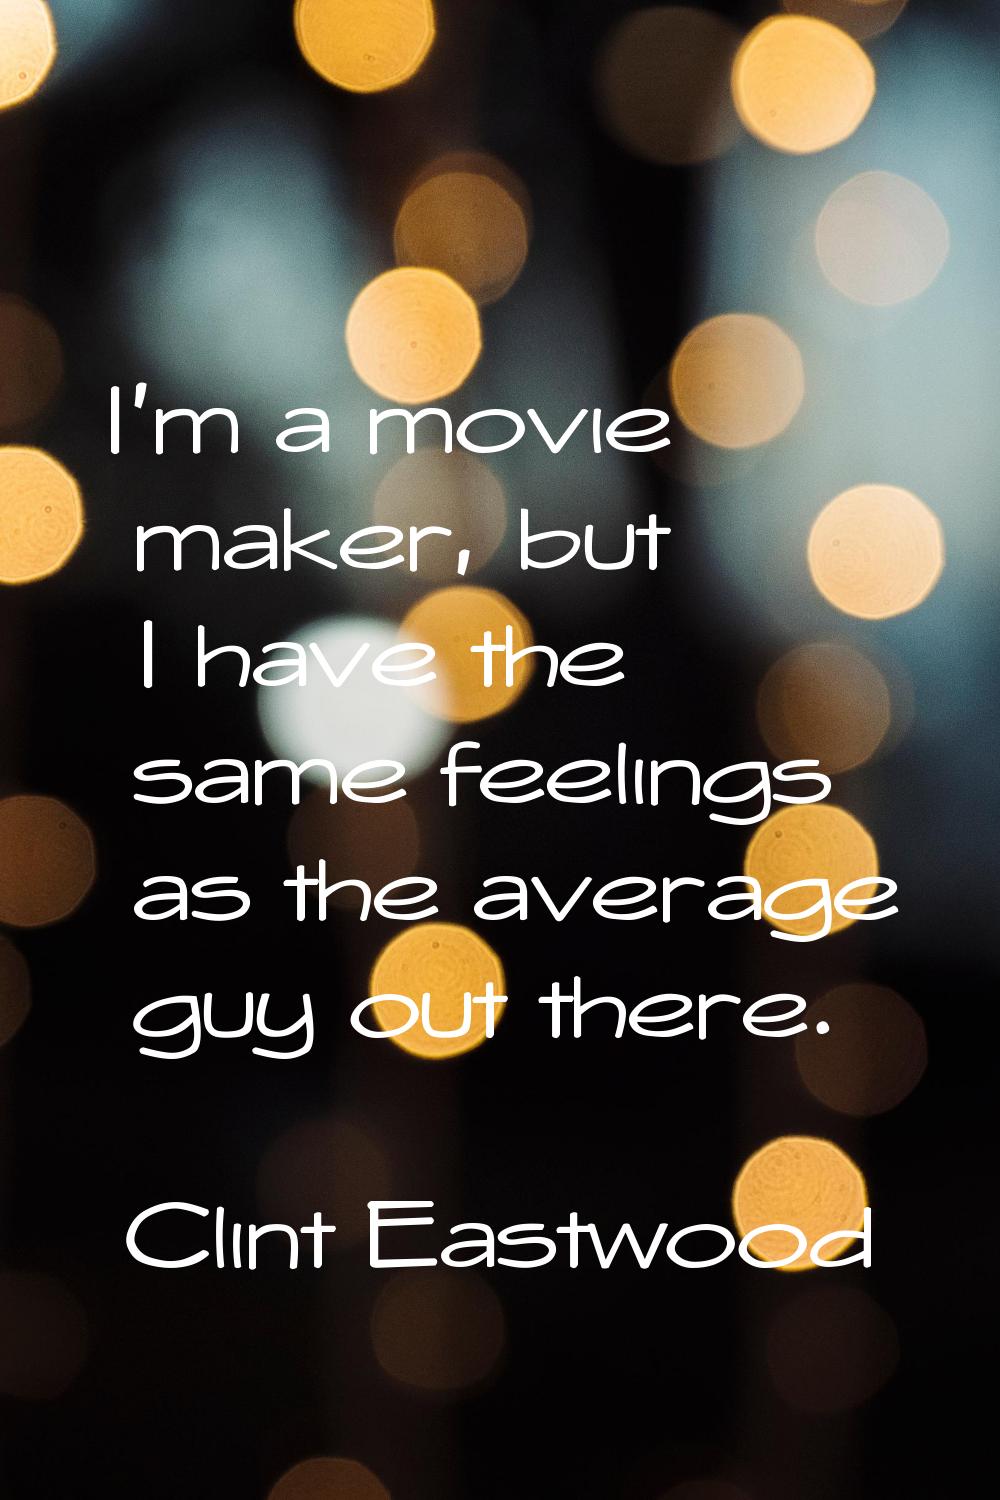 I'm a movie maker, but I have the same feelings as the average guy out there.